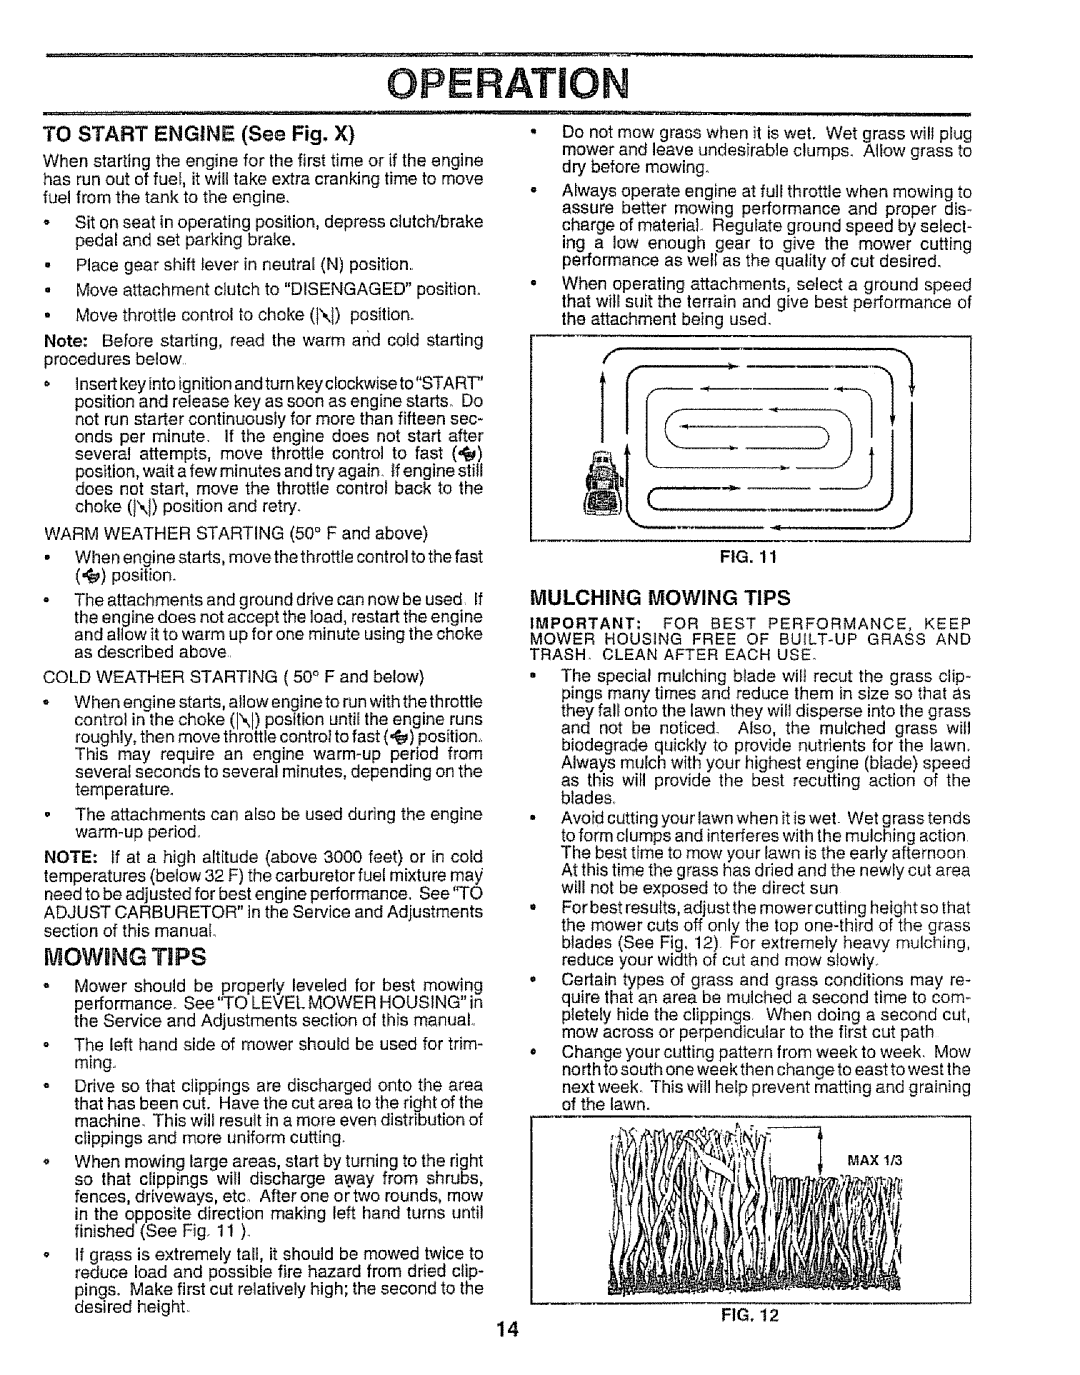 Sears 917.258542 owner manual MOWUNG TiPS, Operation, TO START ENGINE See Fig, Mulching Mowing Tips 